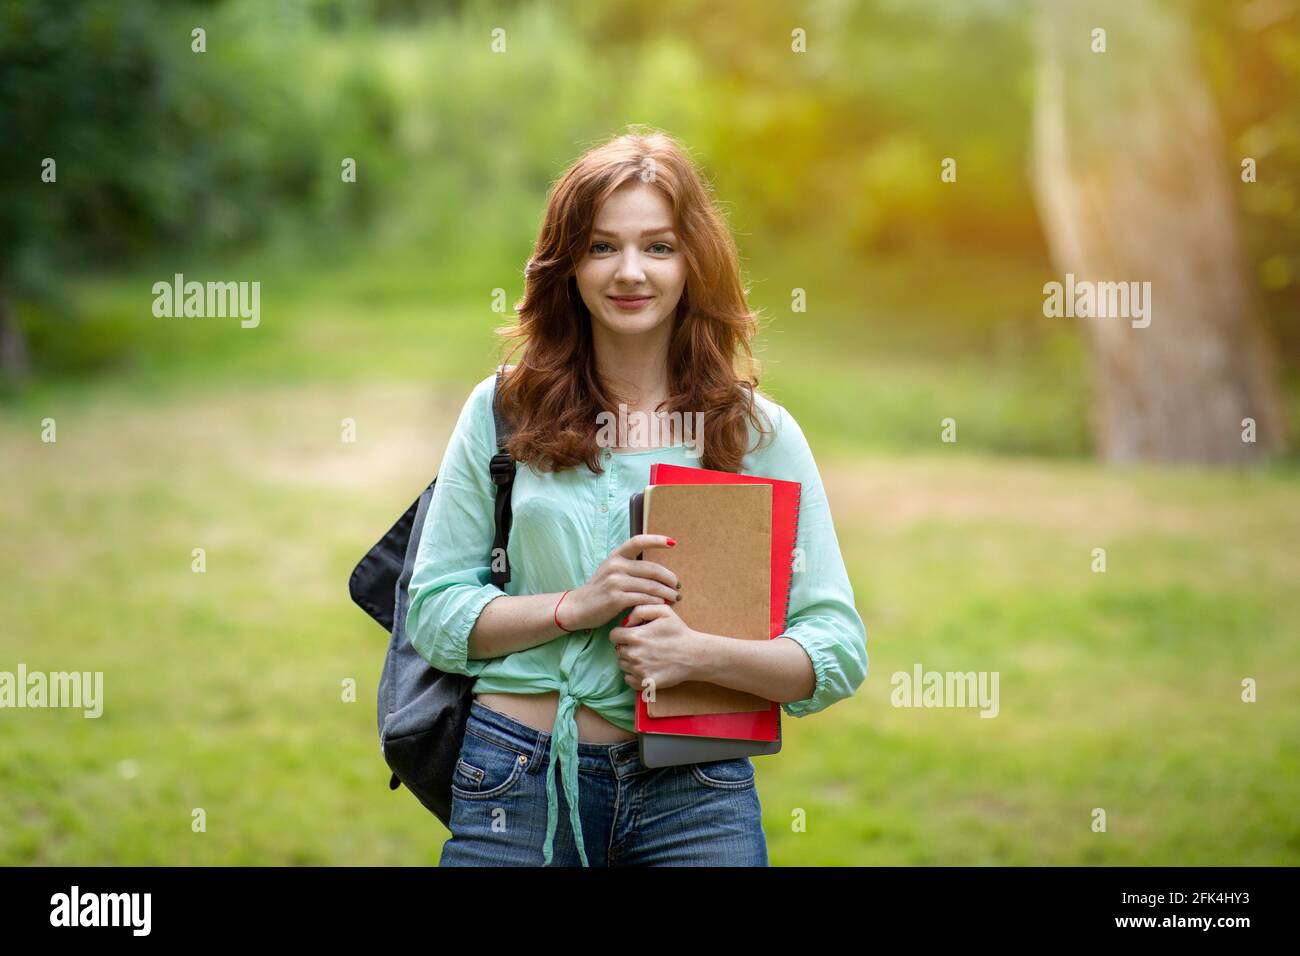 Attractive redhead student girl with backpack and workbooks posing at campus yard Stock Photo